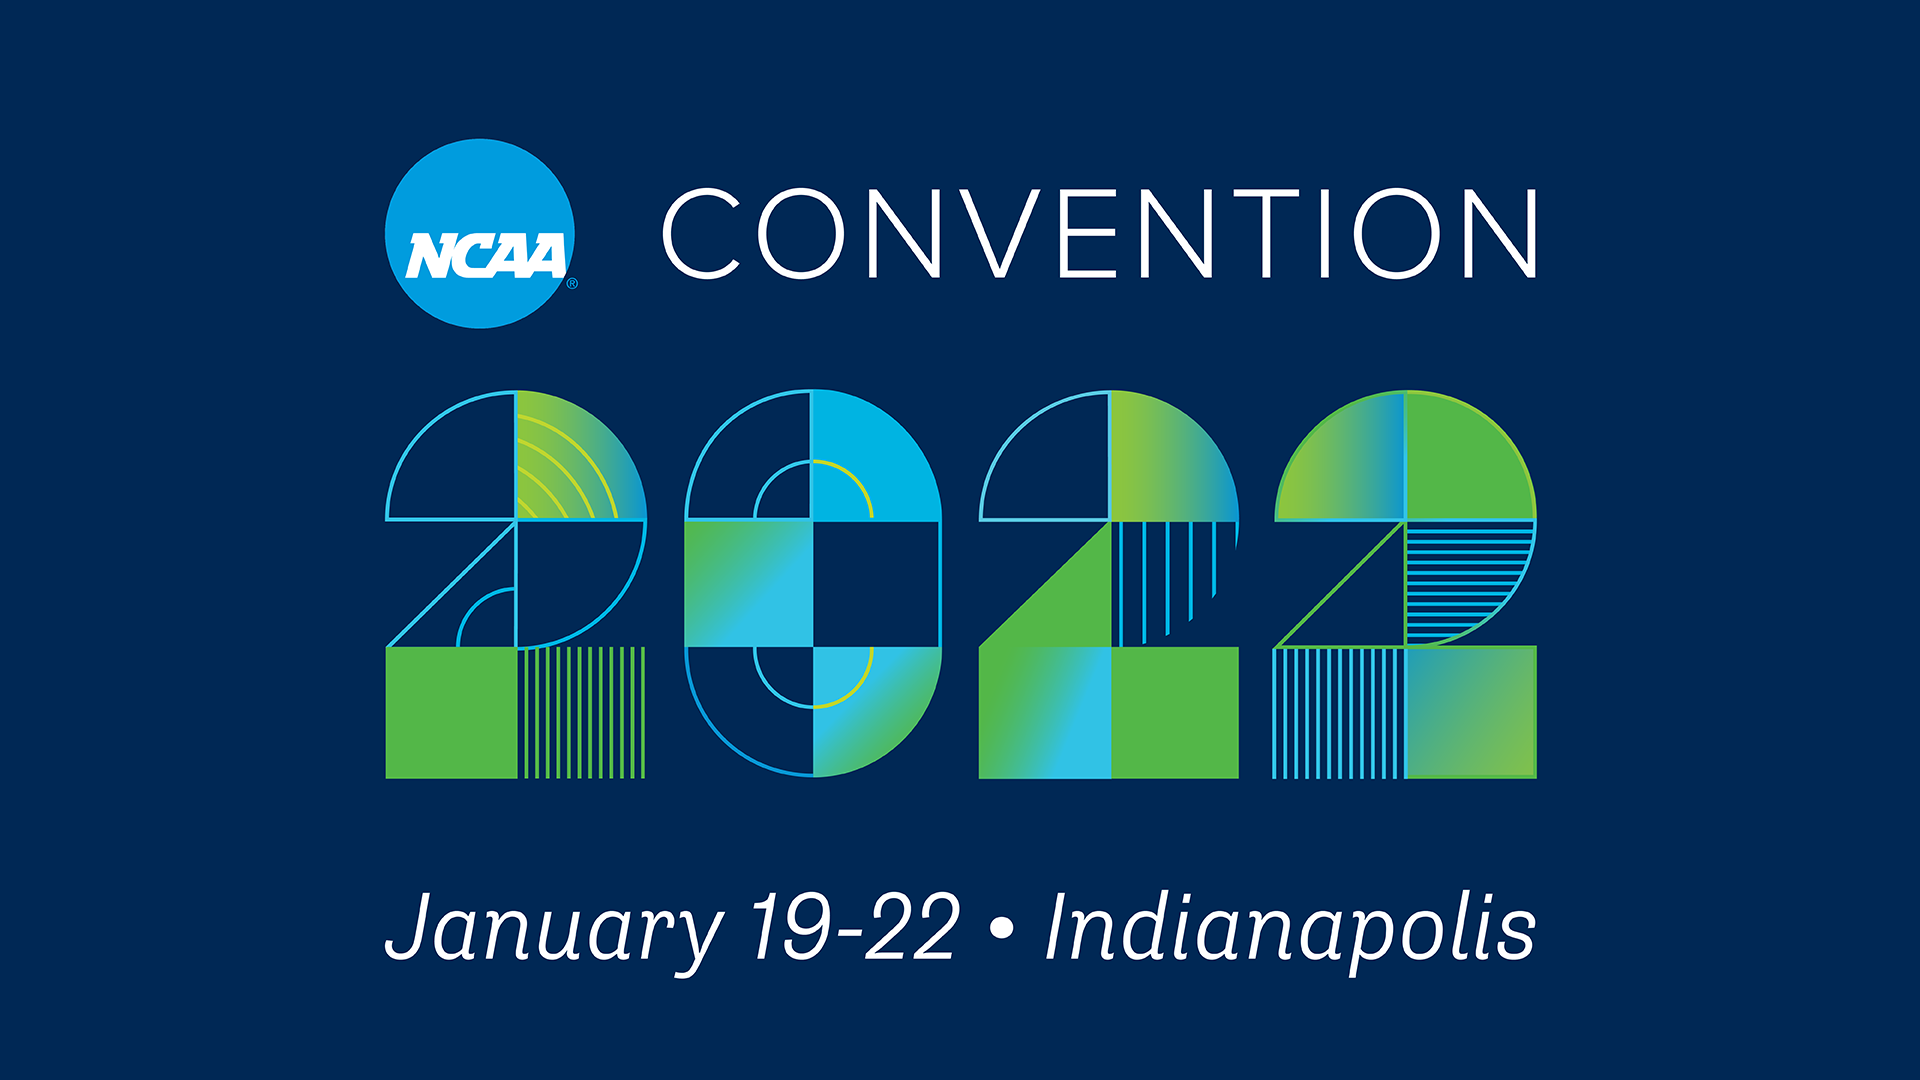 New constitution expected to dominate headlines at 2022 NCAA Convention